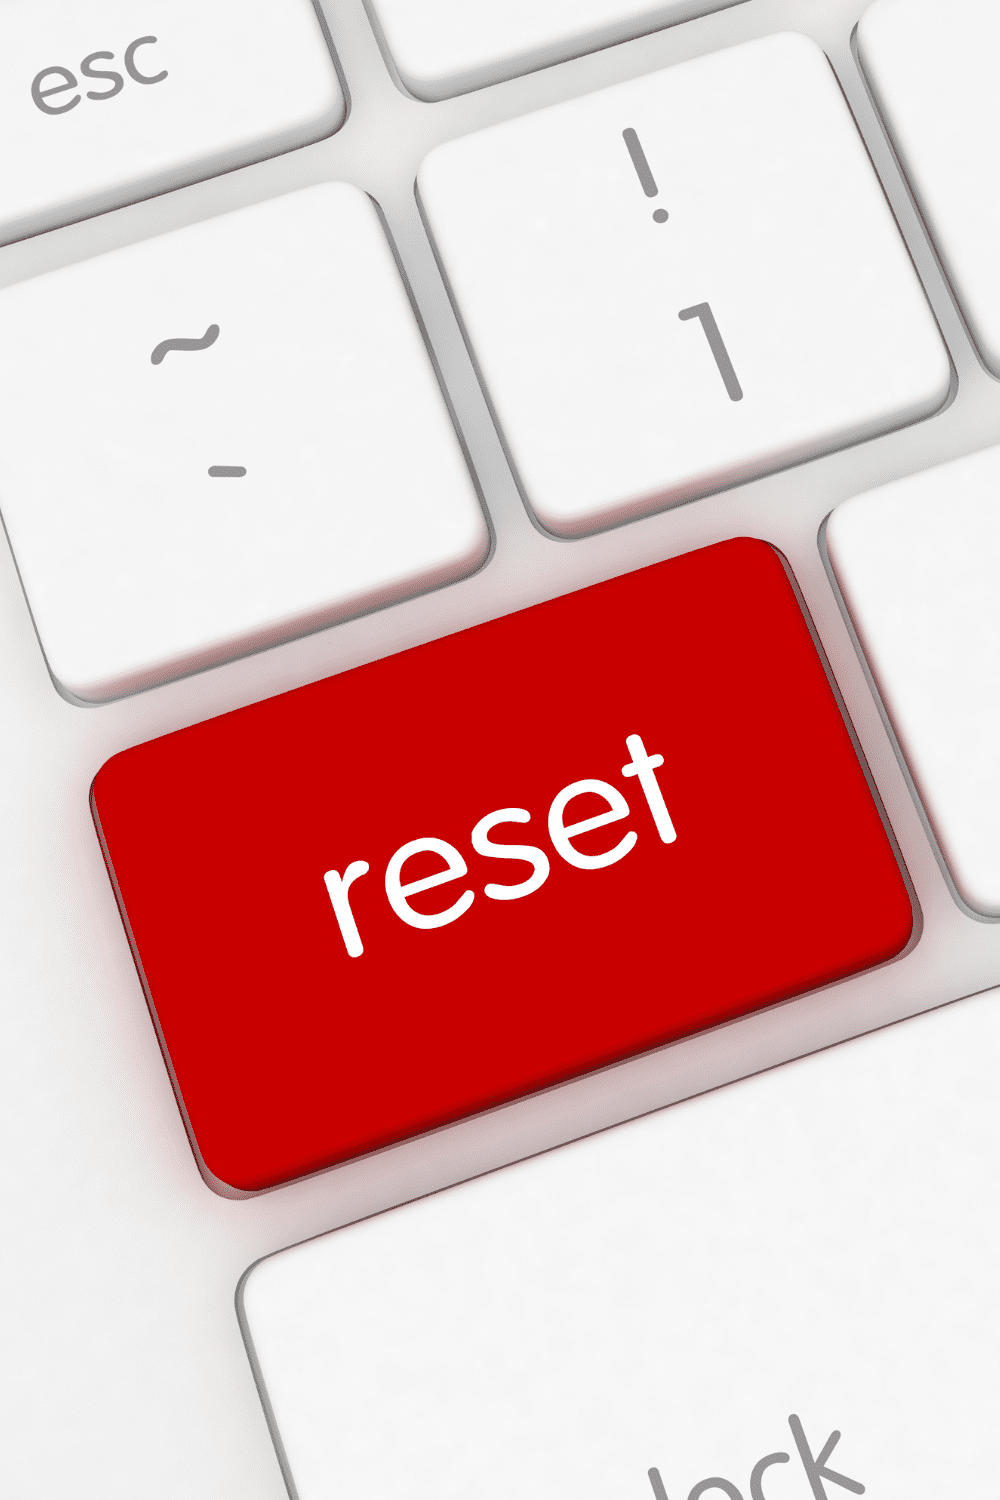 reset button on computer keyboard